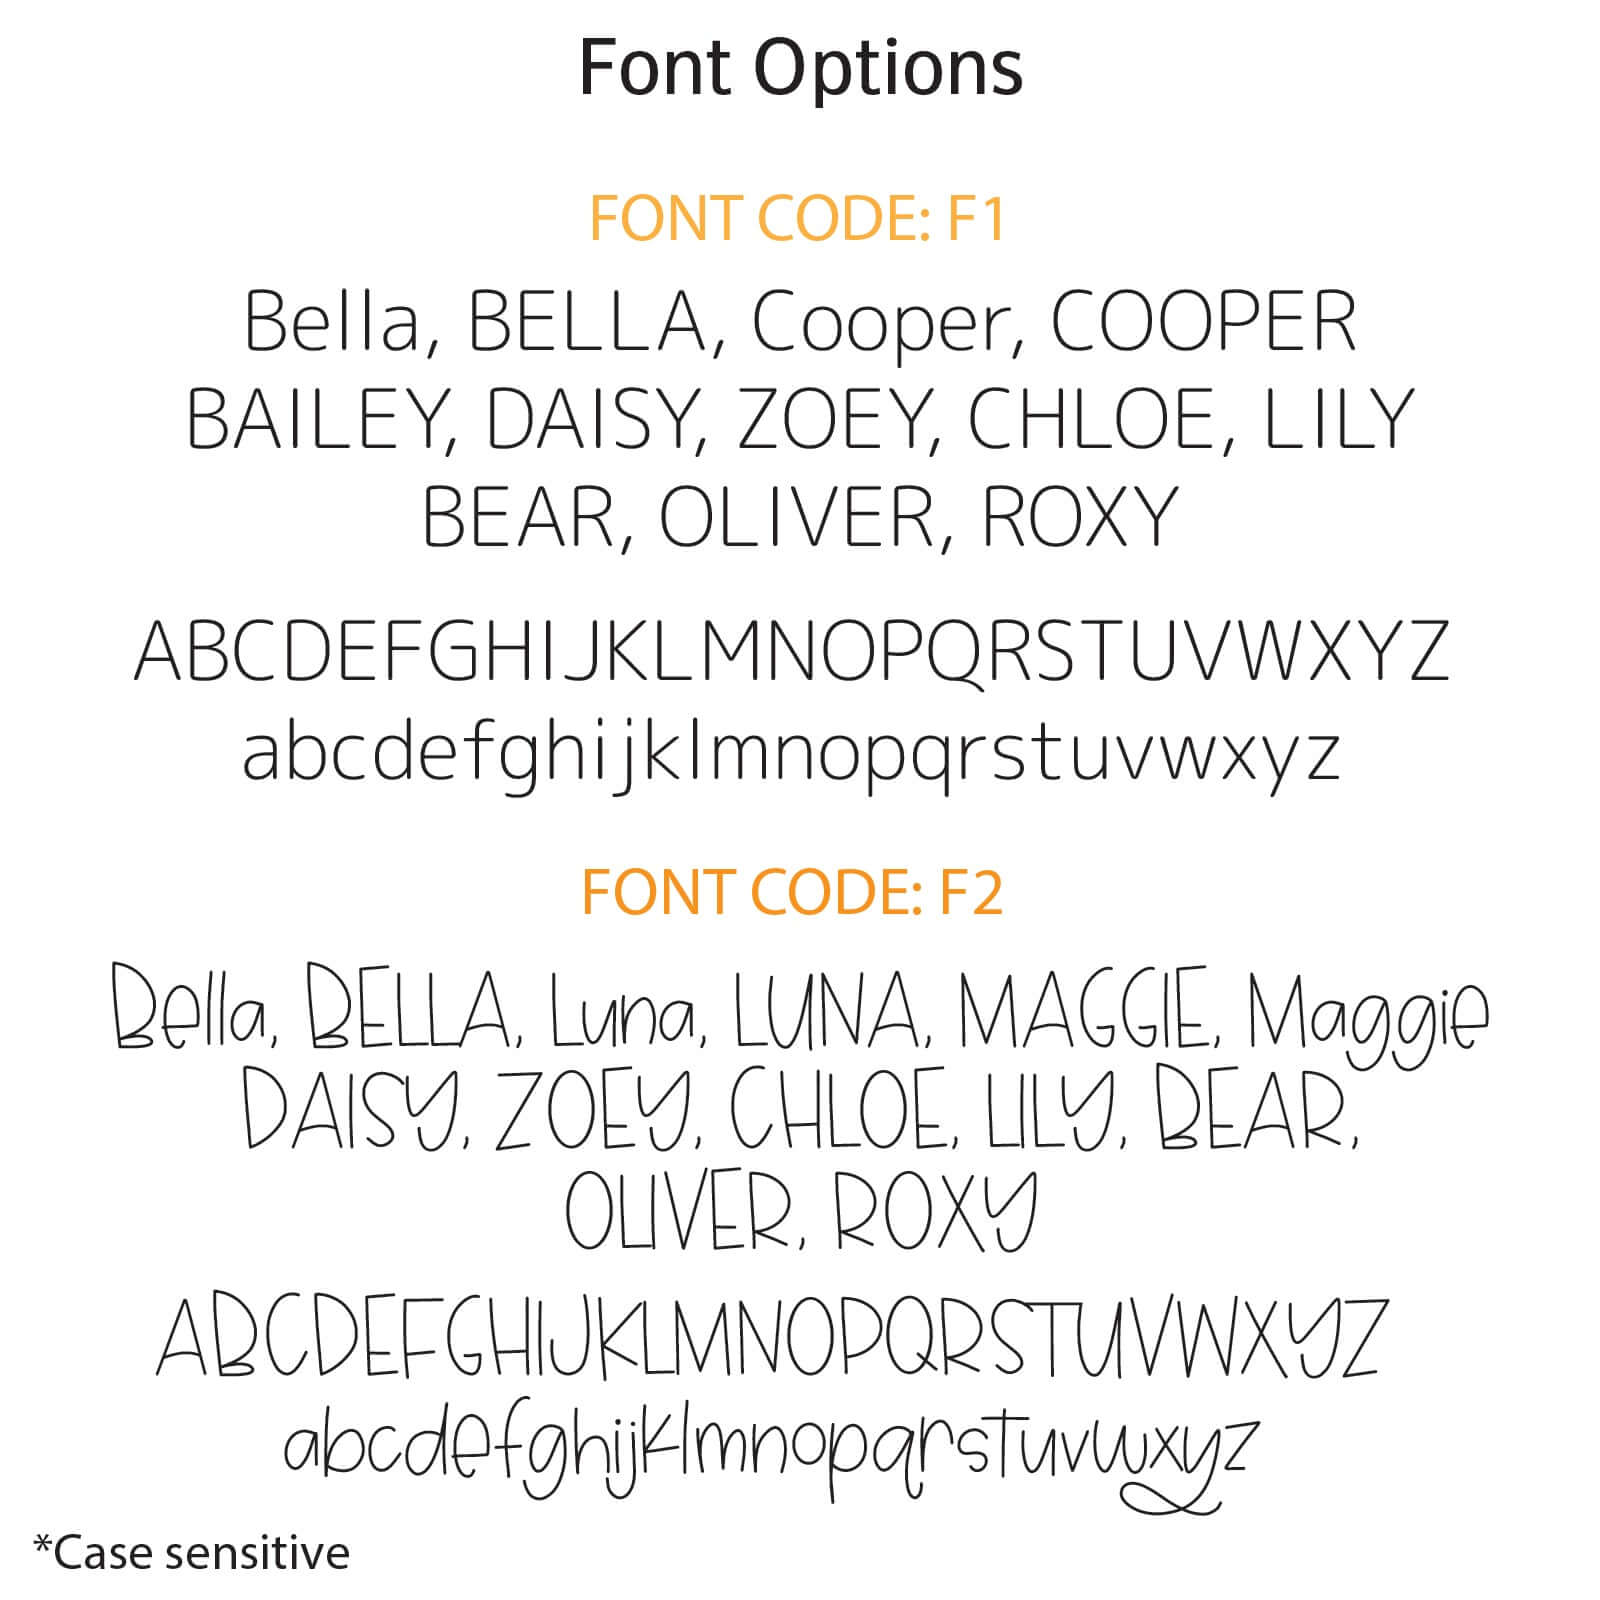 Personalized Dog Tags Font